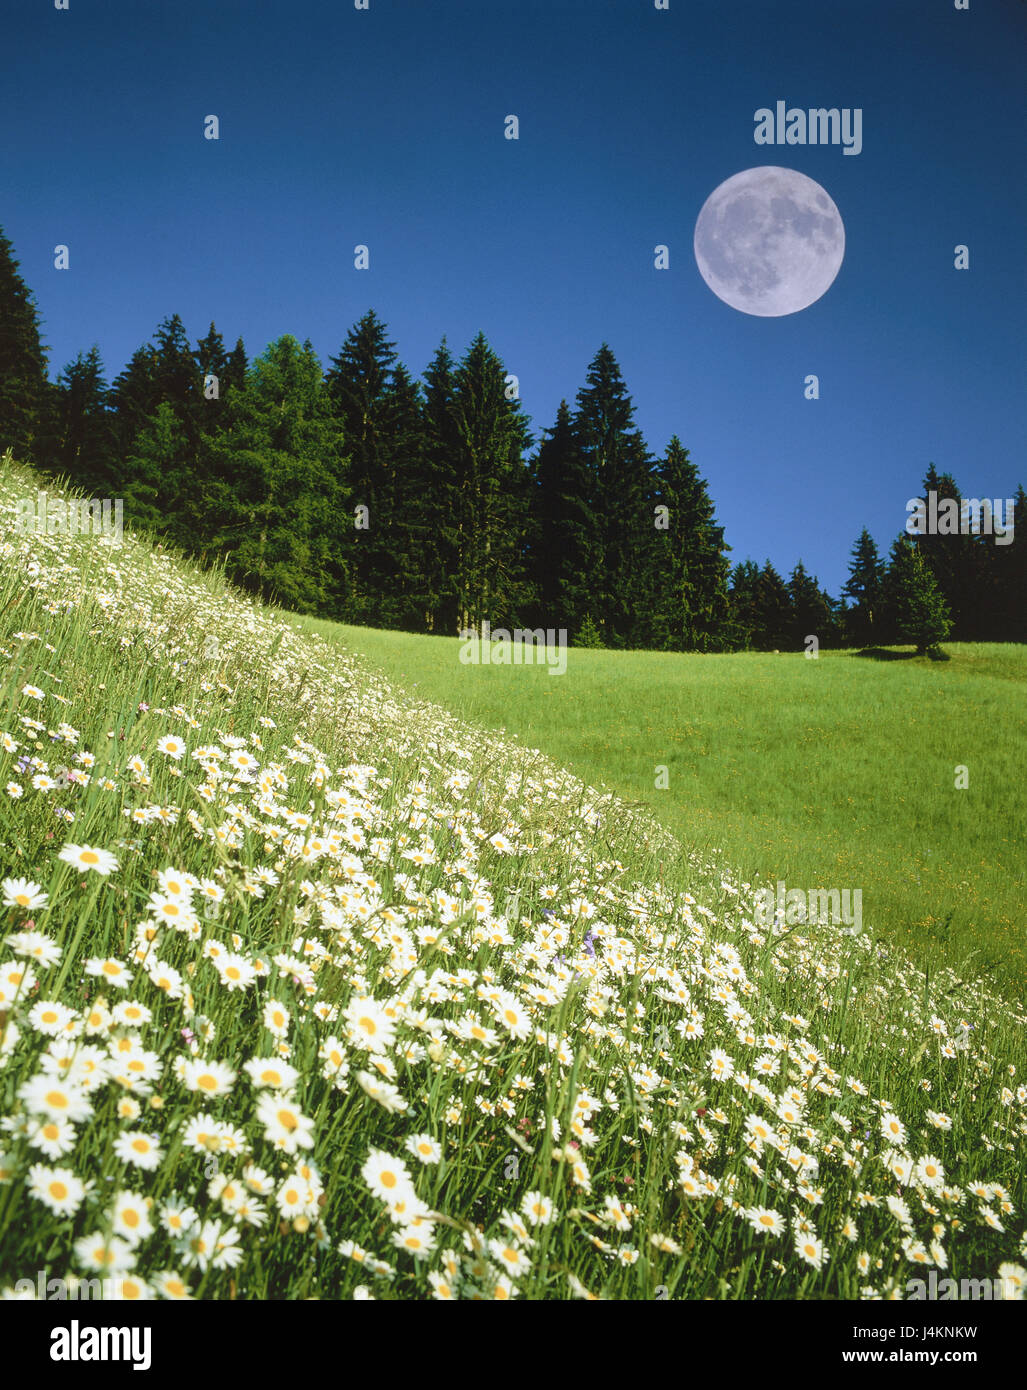 Wood, meadow, inclination, margin rites, heavens, full moon trees, conifers, edge of the forest, hill, mountainside, flower meadow, summer meadow, margin rite meadow, flowers, white, summer, summer flowers, mountain pasture, nature, natural light, tag, time of day, moon, planet, unusually, phase of the moon, season, sunshine, blue, cloudless, [M] Stock Photo